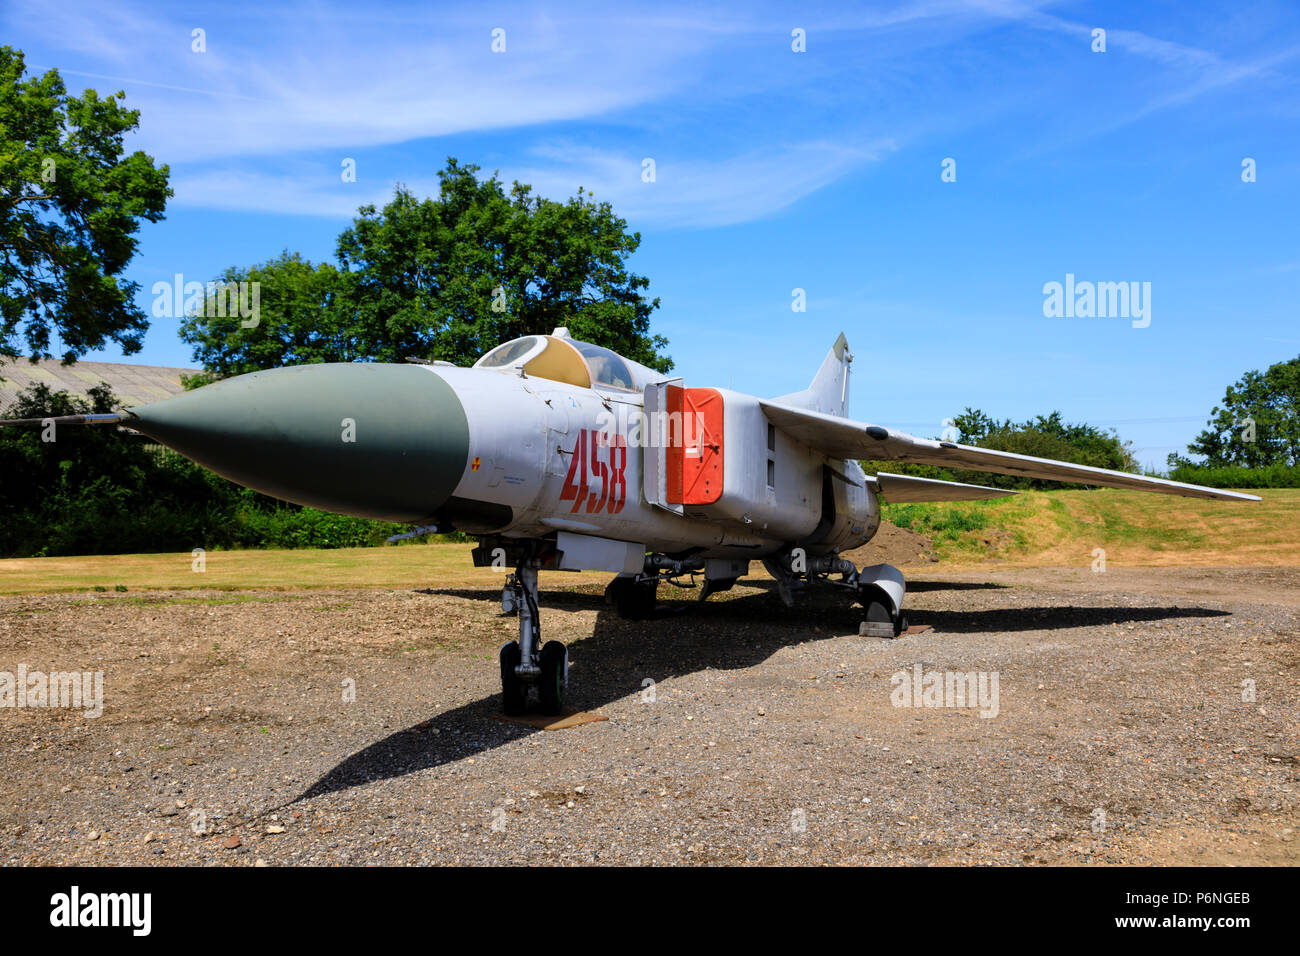 Il russo Mikoyan Gurevich Mig 23ML "Flogger" a Newark air museum, Newark upon Trent, Nottinghamshire, Inghilterra Foto Stock